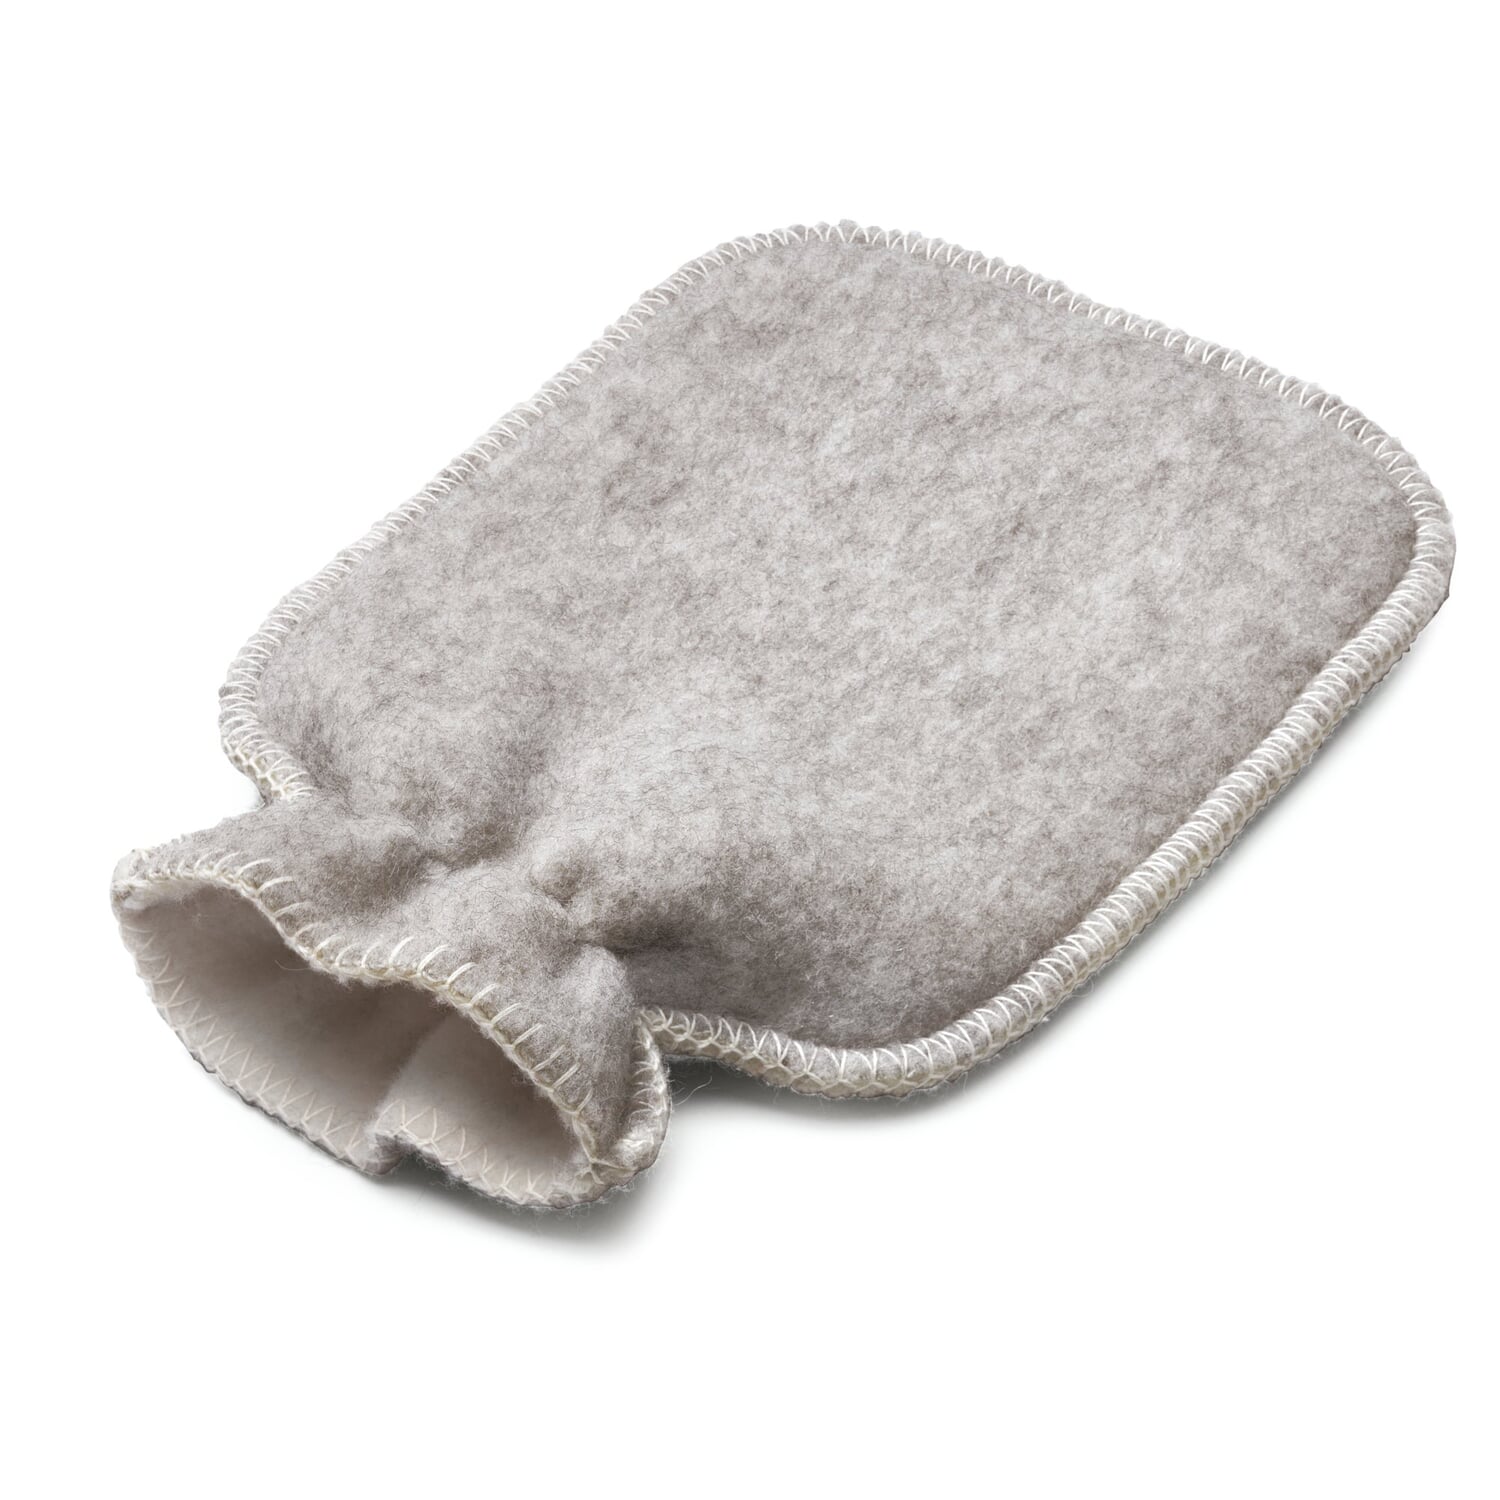 Cabea Clear Hot Water Bottle with Linen White Knit Cover (Color: Linen White)